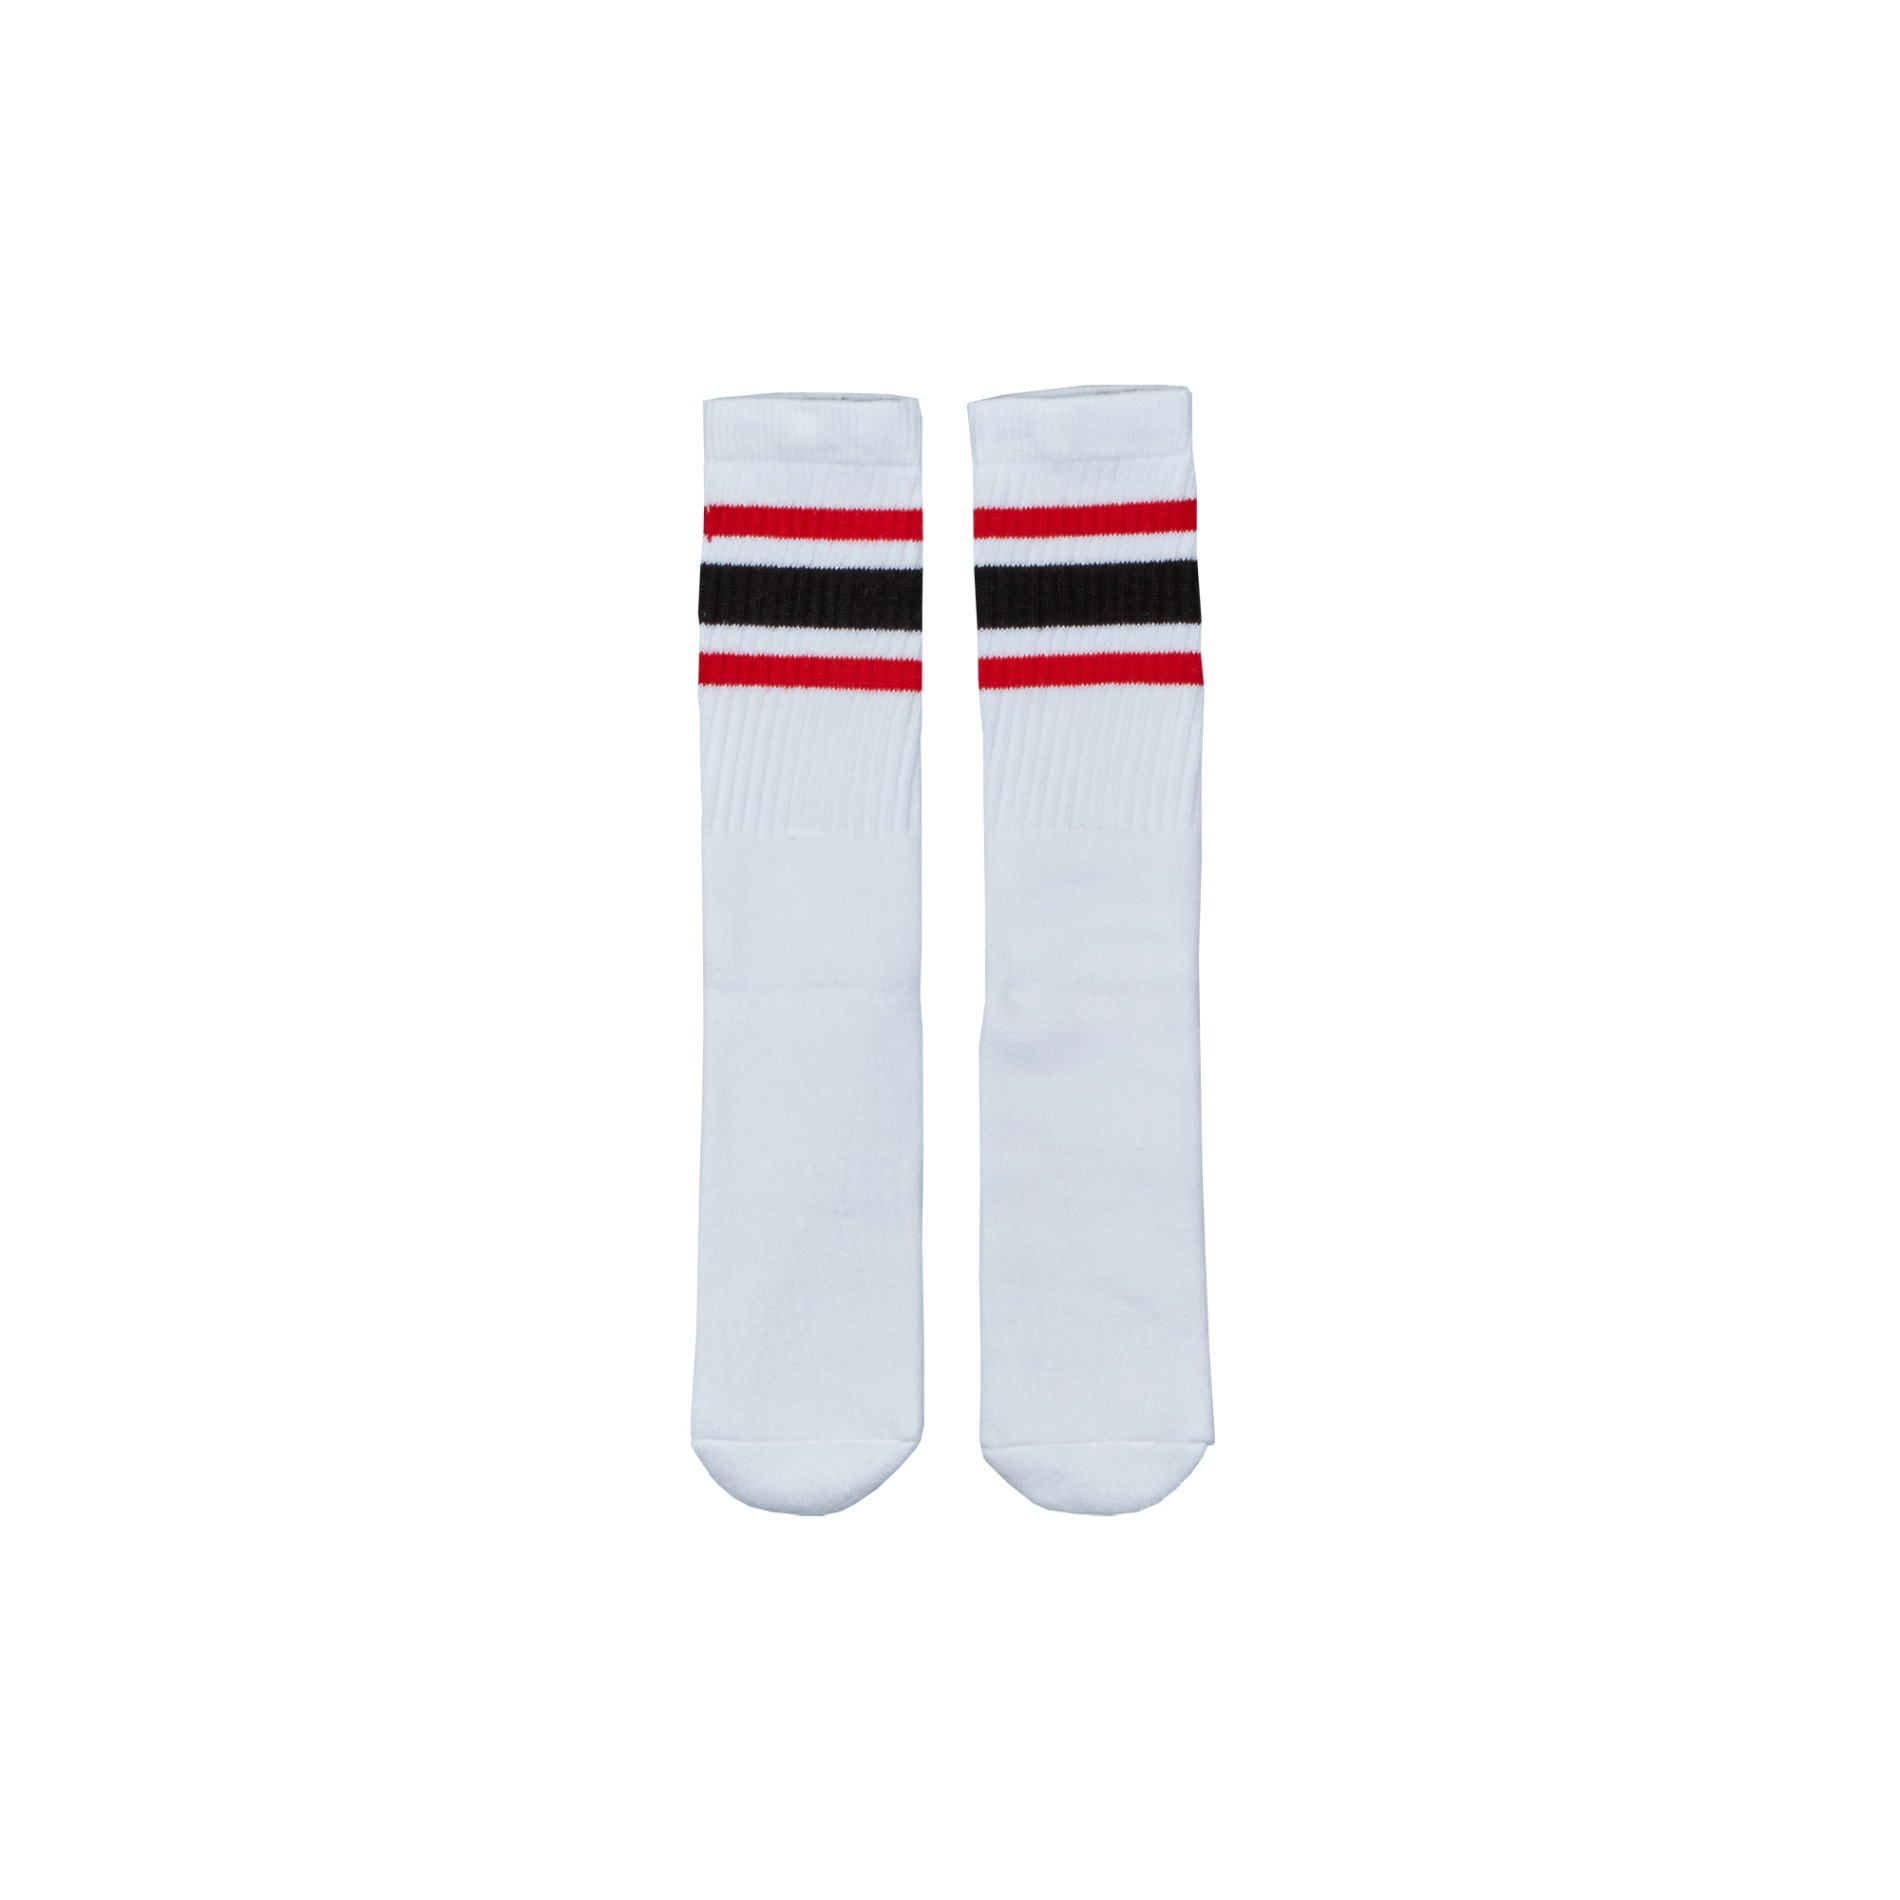 MID CALF WHITE TUBE SOCKS WITH RED-BLACK STRIPES STYLE 3